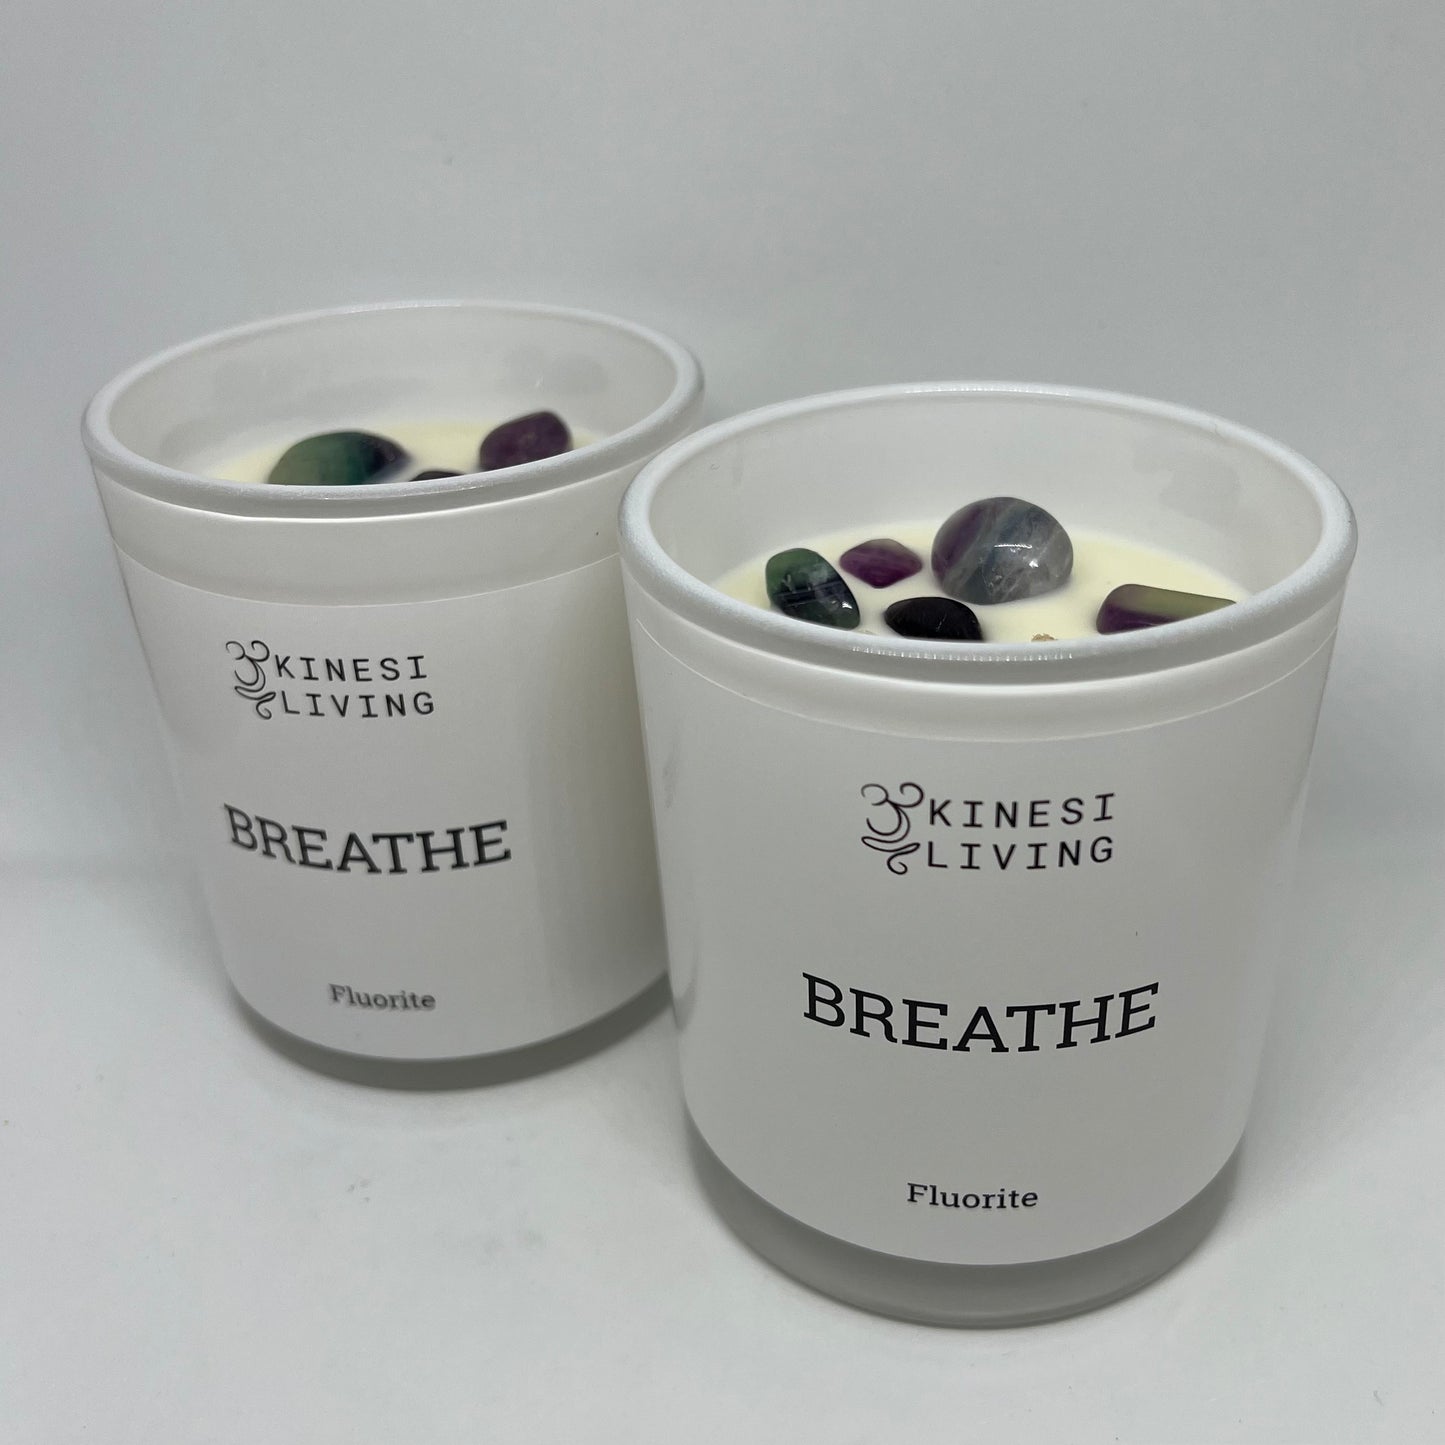 Breathe Fluorite Crystal infused Candles